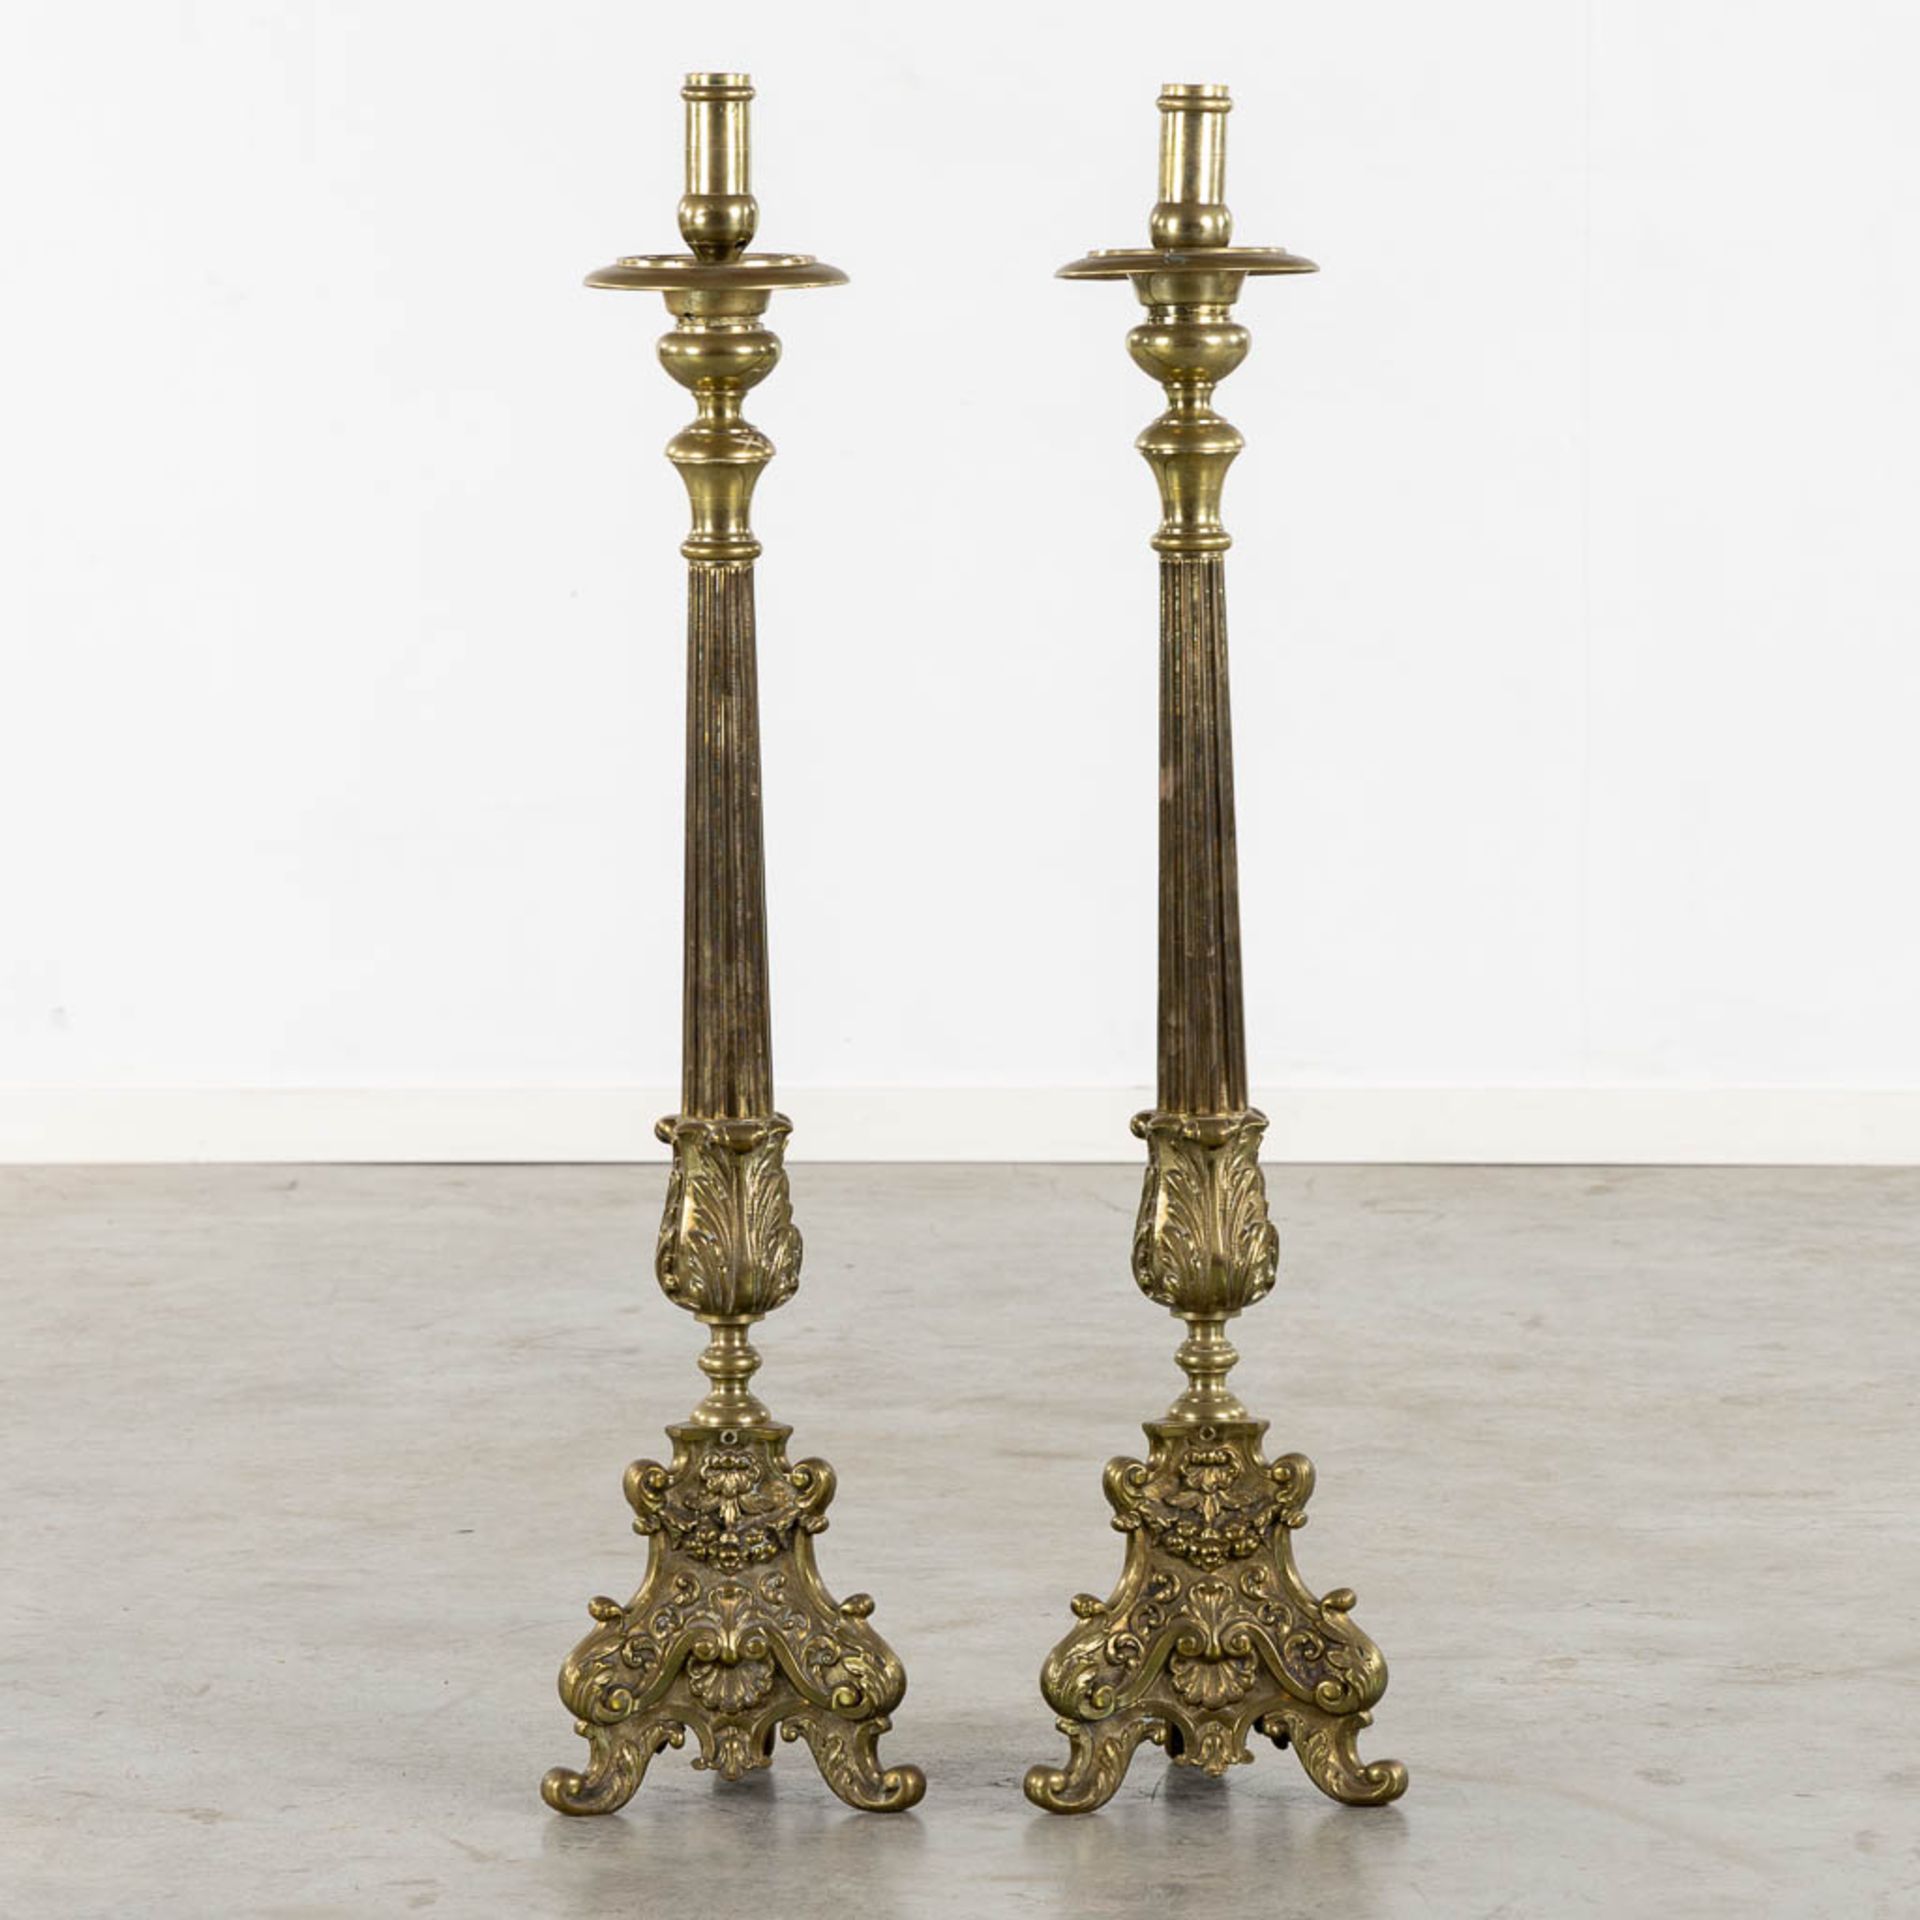 A pair of bronze church candlesticks/candle holders, Louis XV style. Circa 1900. (W:23 x H:105 cm) - Image 14 of 19